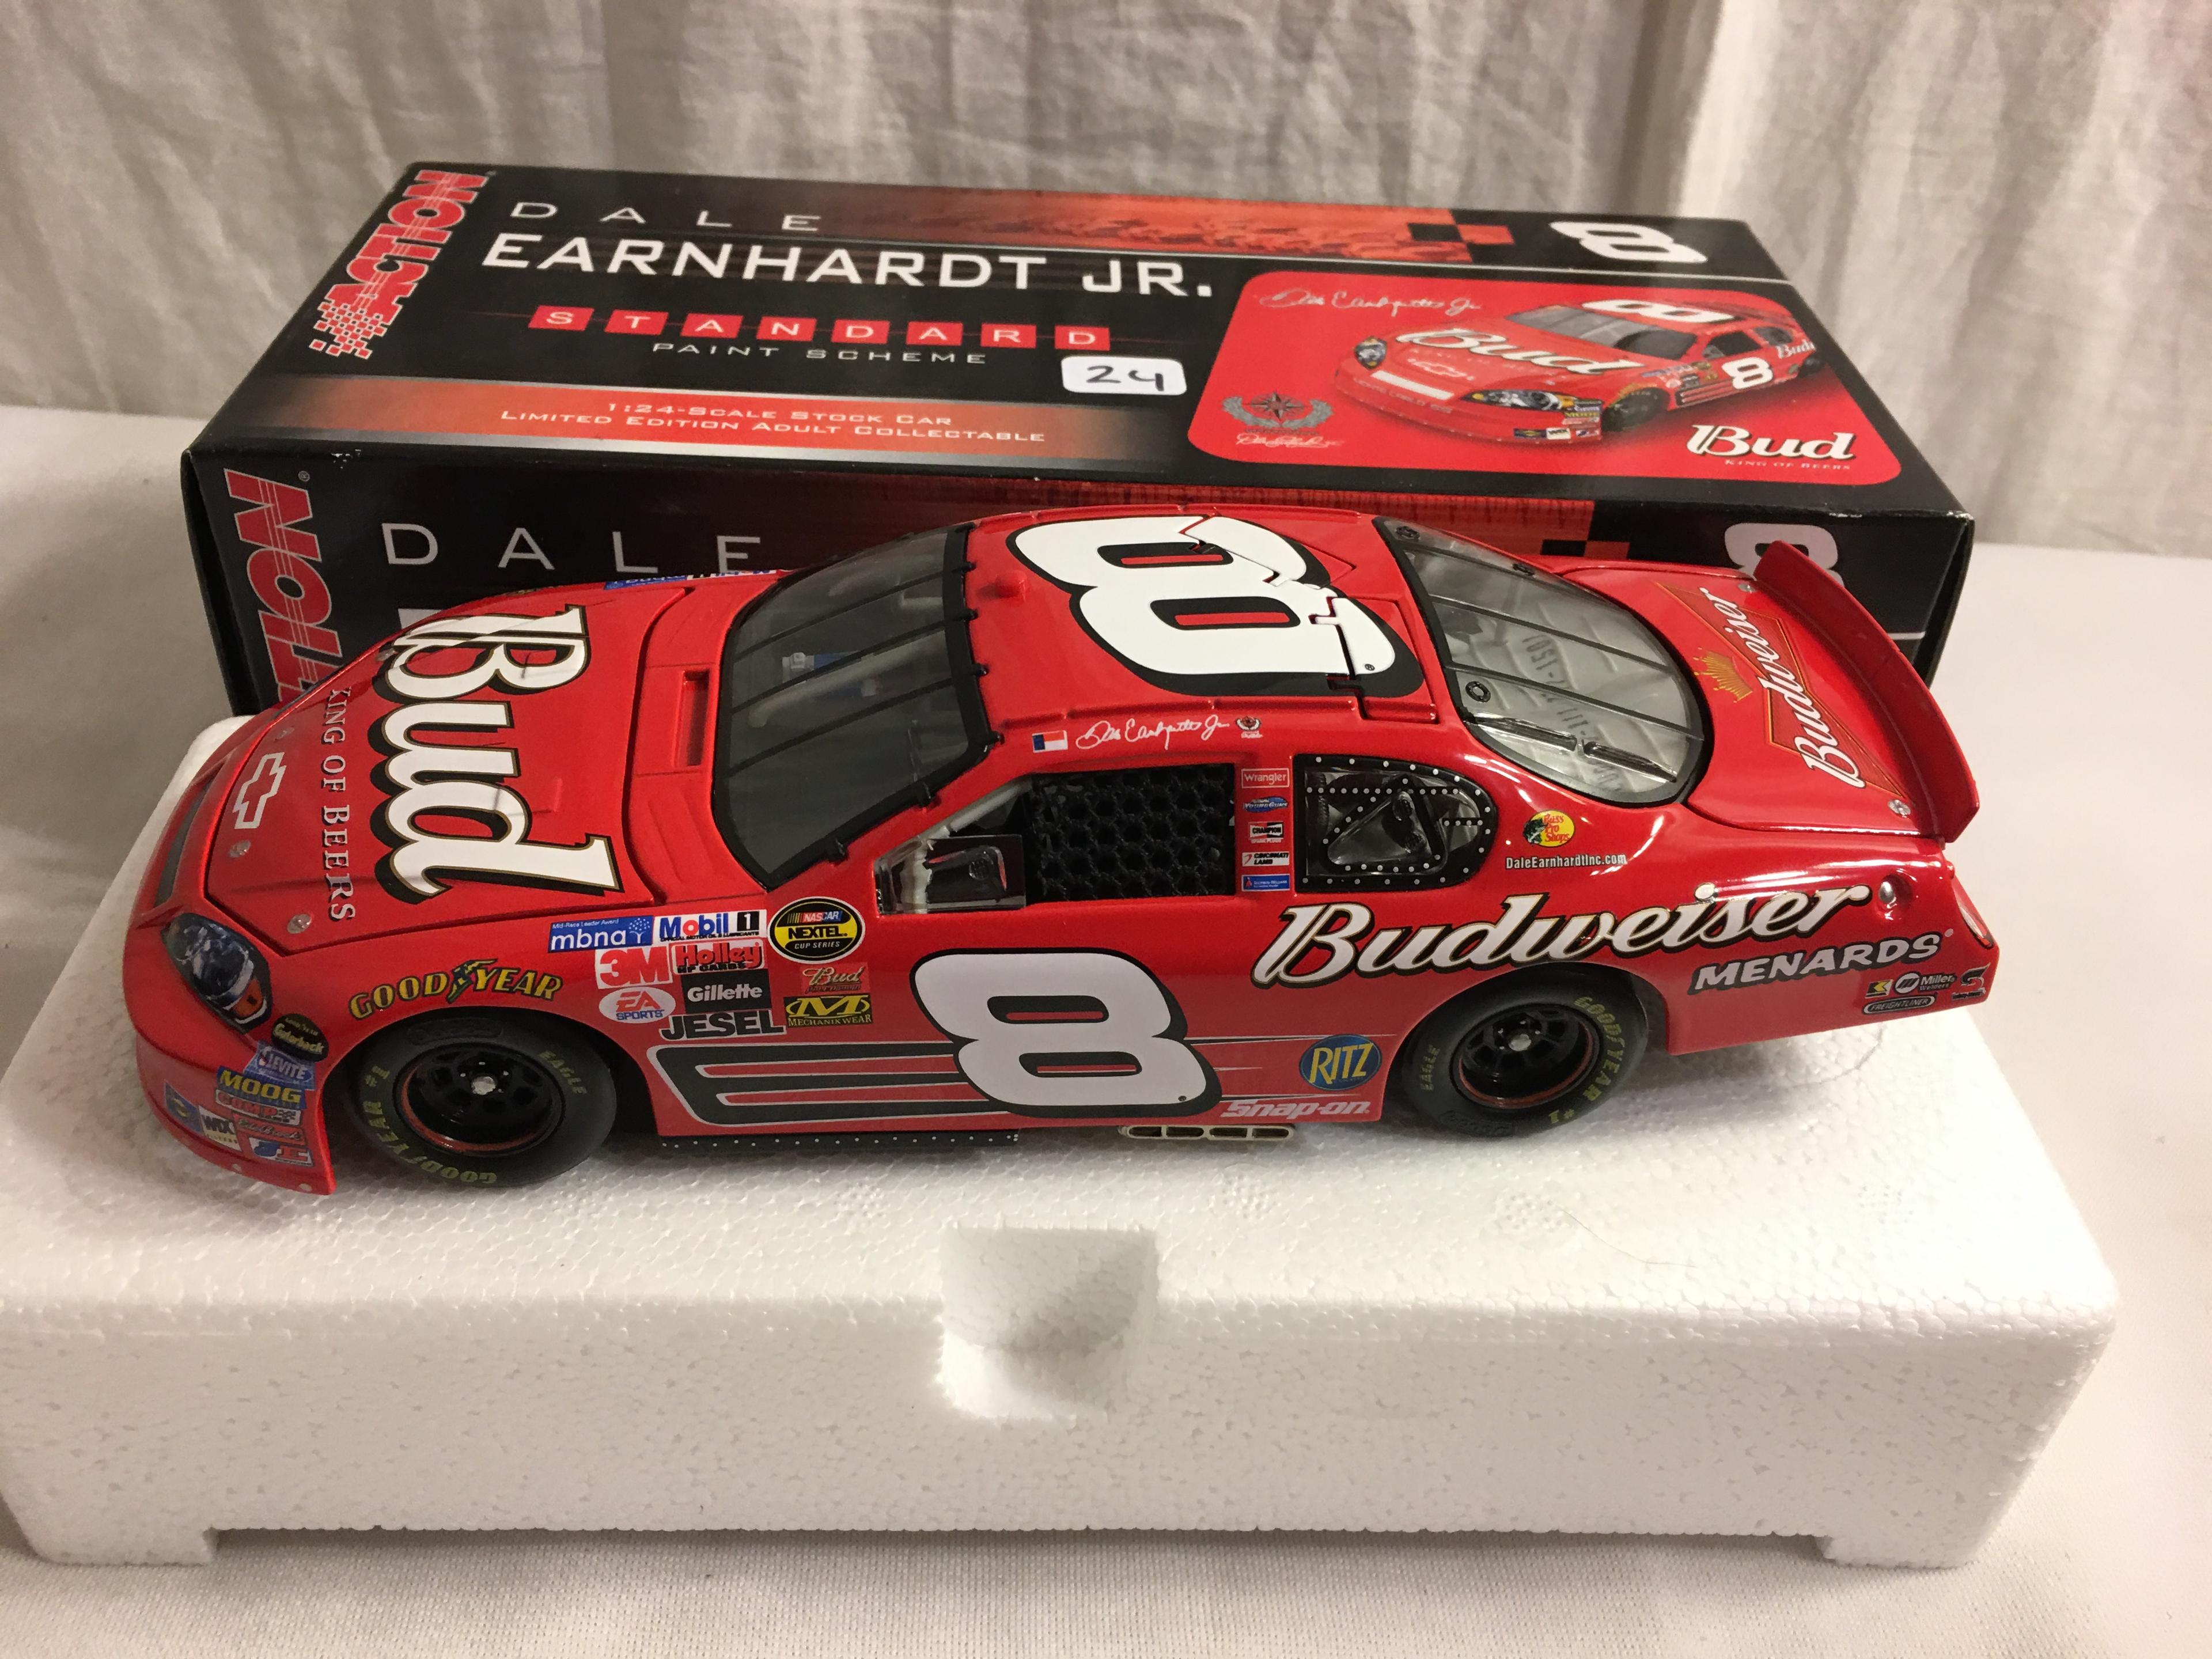 Action Racing 2006 Monte Carlo Earnhardt Jr. #8 Budweiser 1:24 Scale Stock Car Limited Edt. #111177